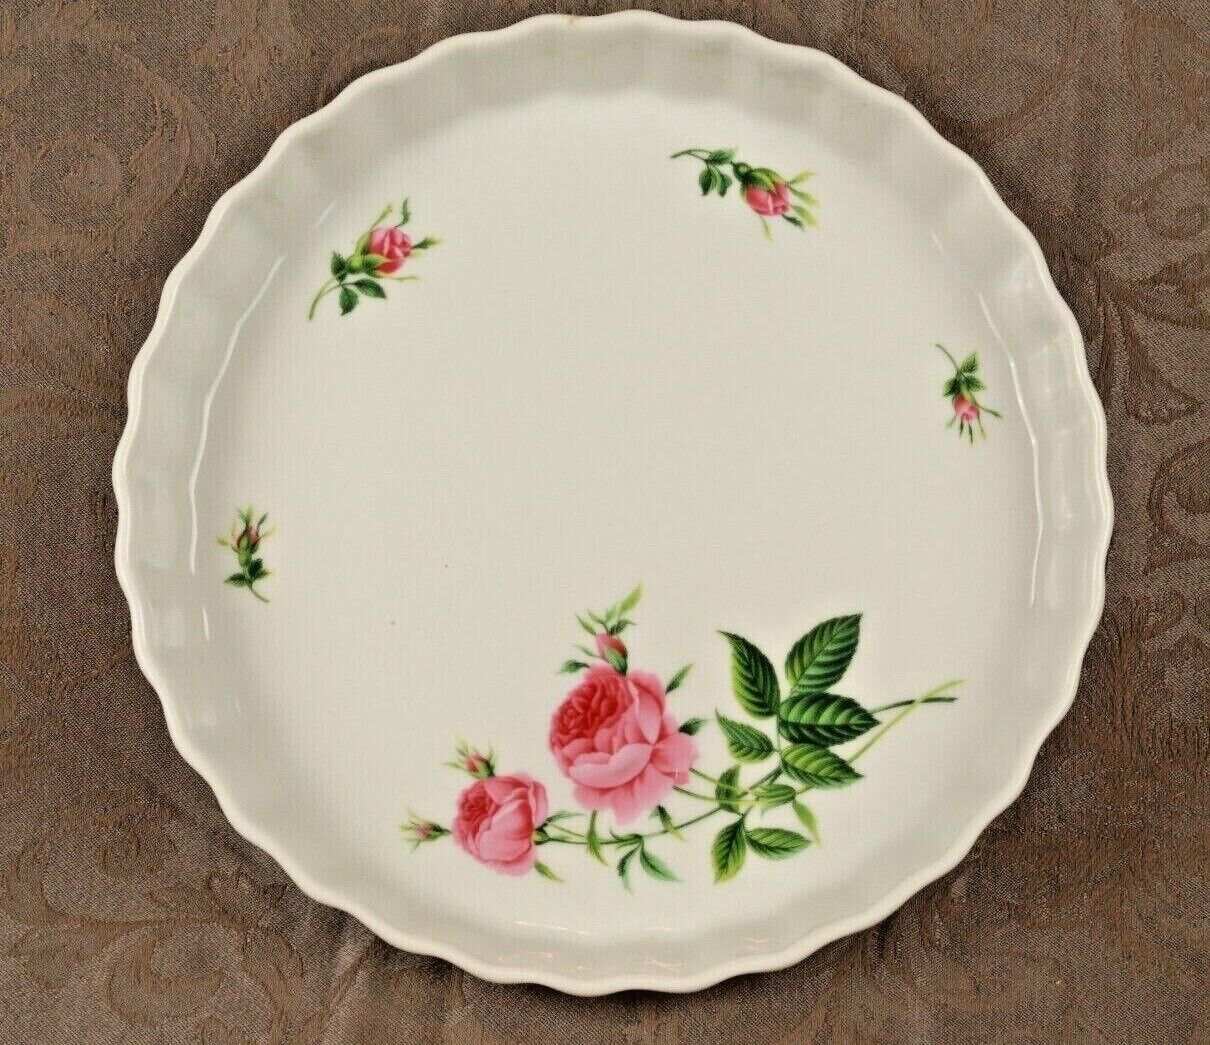 Primary image for Christineholm Porcelain Rose Pattern Quiche Tart Pie Plate 9.5" Baking Dish EUC